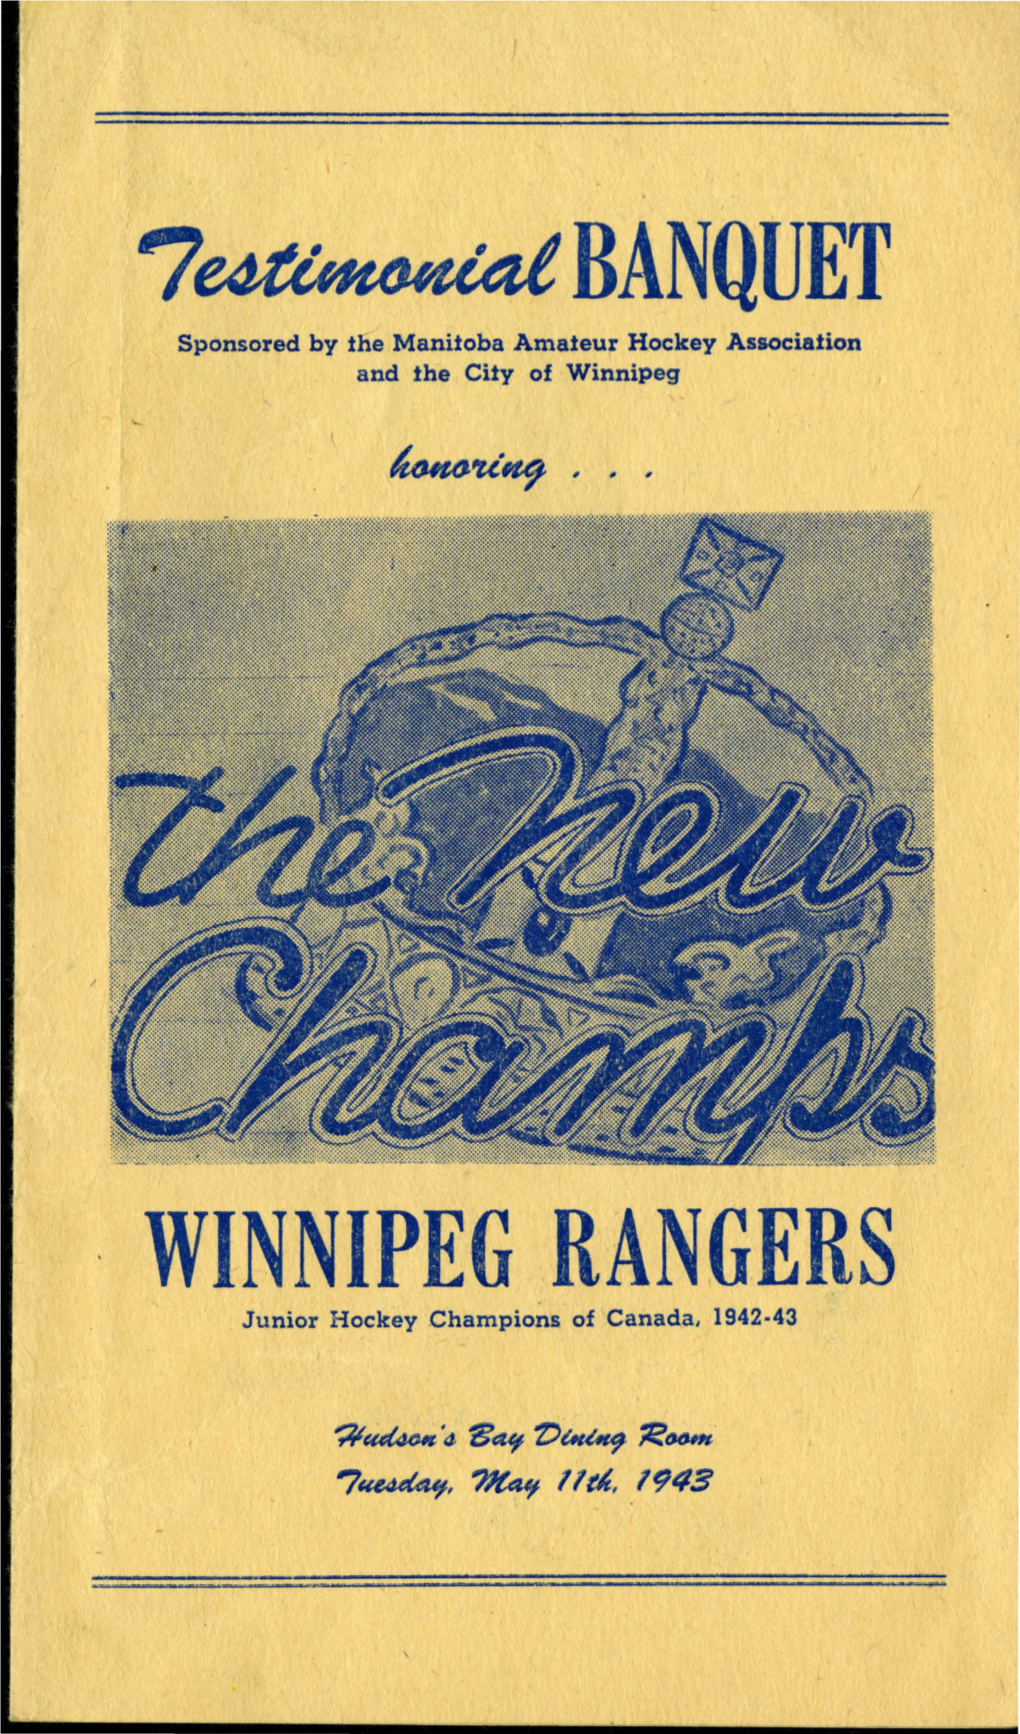 BANQUET Sponsored by the Manitoba Amateur Hockey Association and the City of Winnipeg